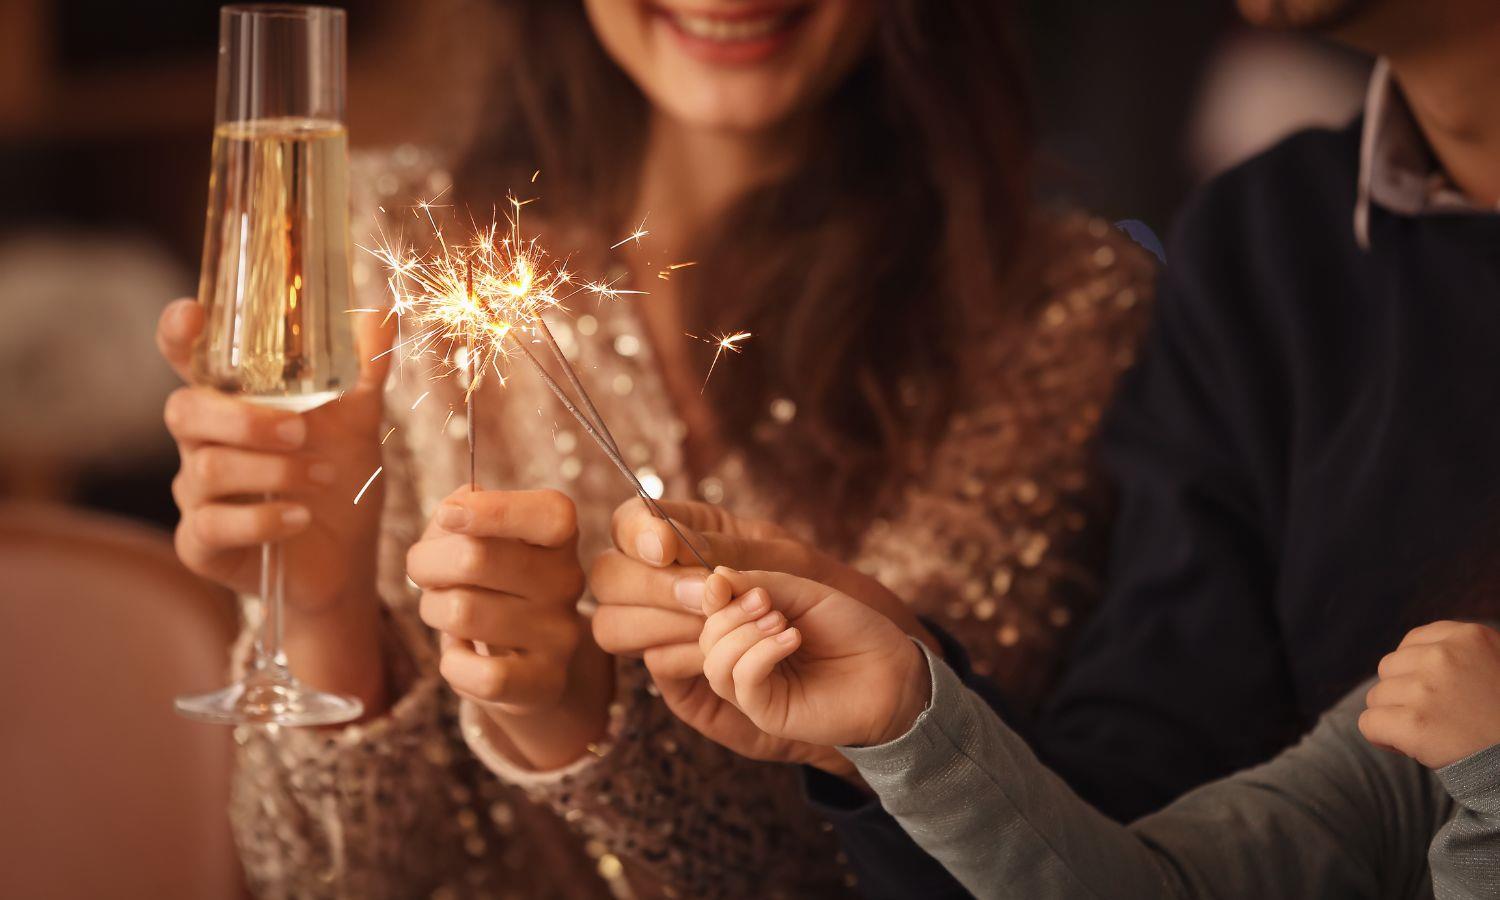 Woman holding a glass of champagne and a boy holding a sparkler